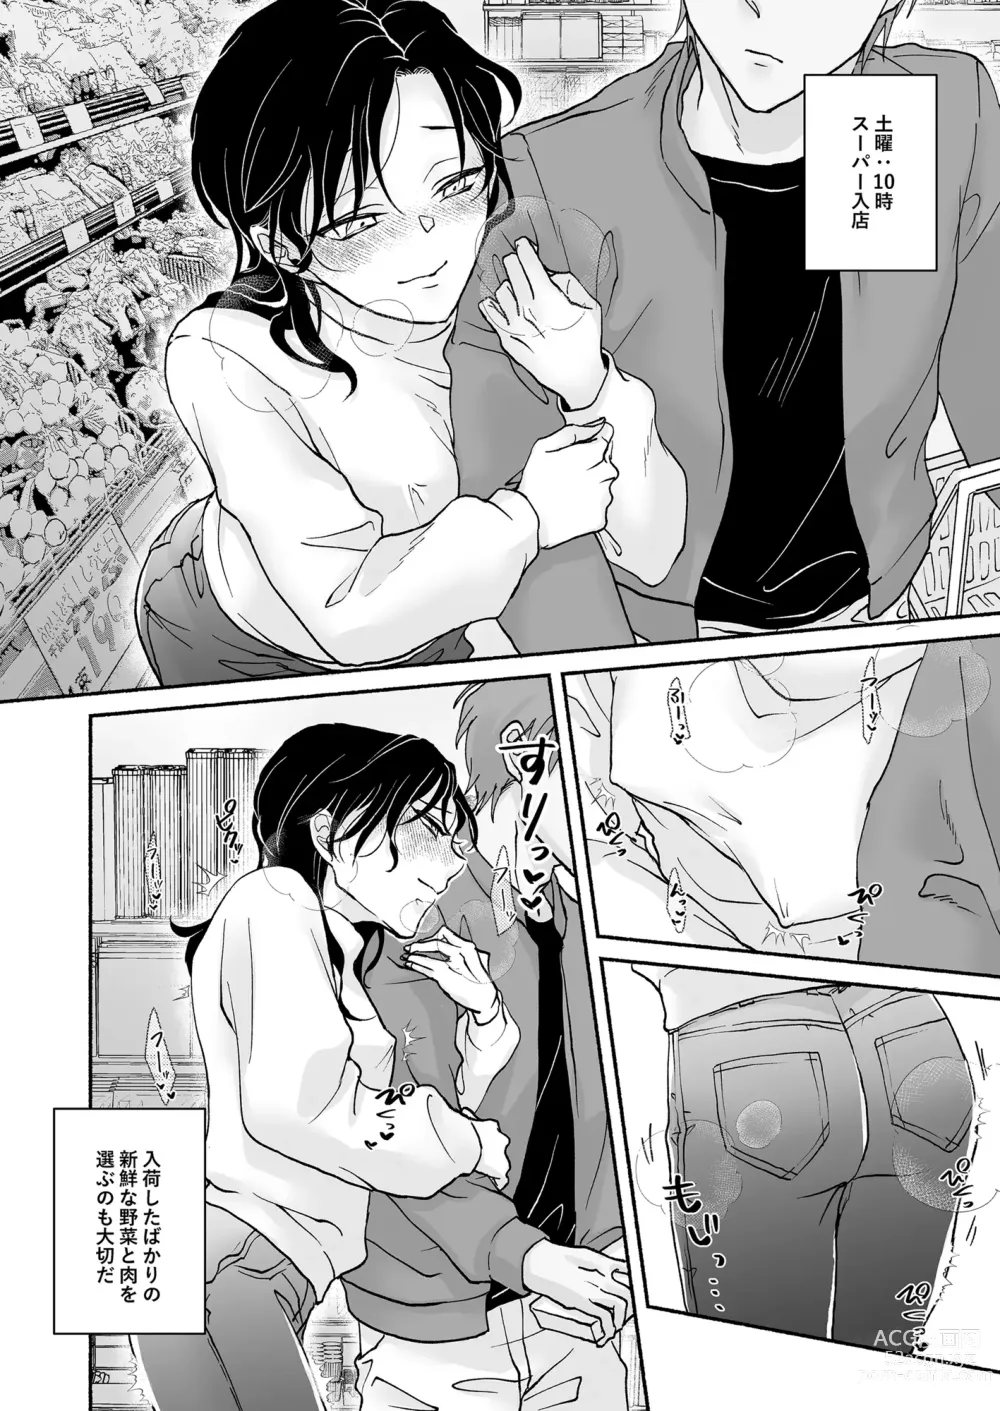 Page 10 of doujinshi Sex and Curry Rice